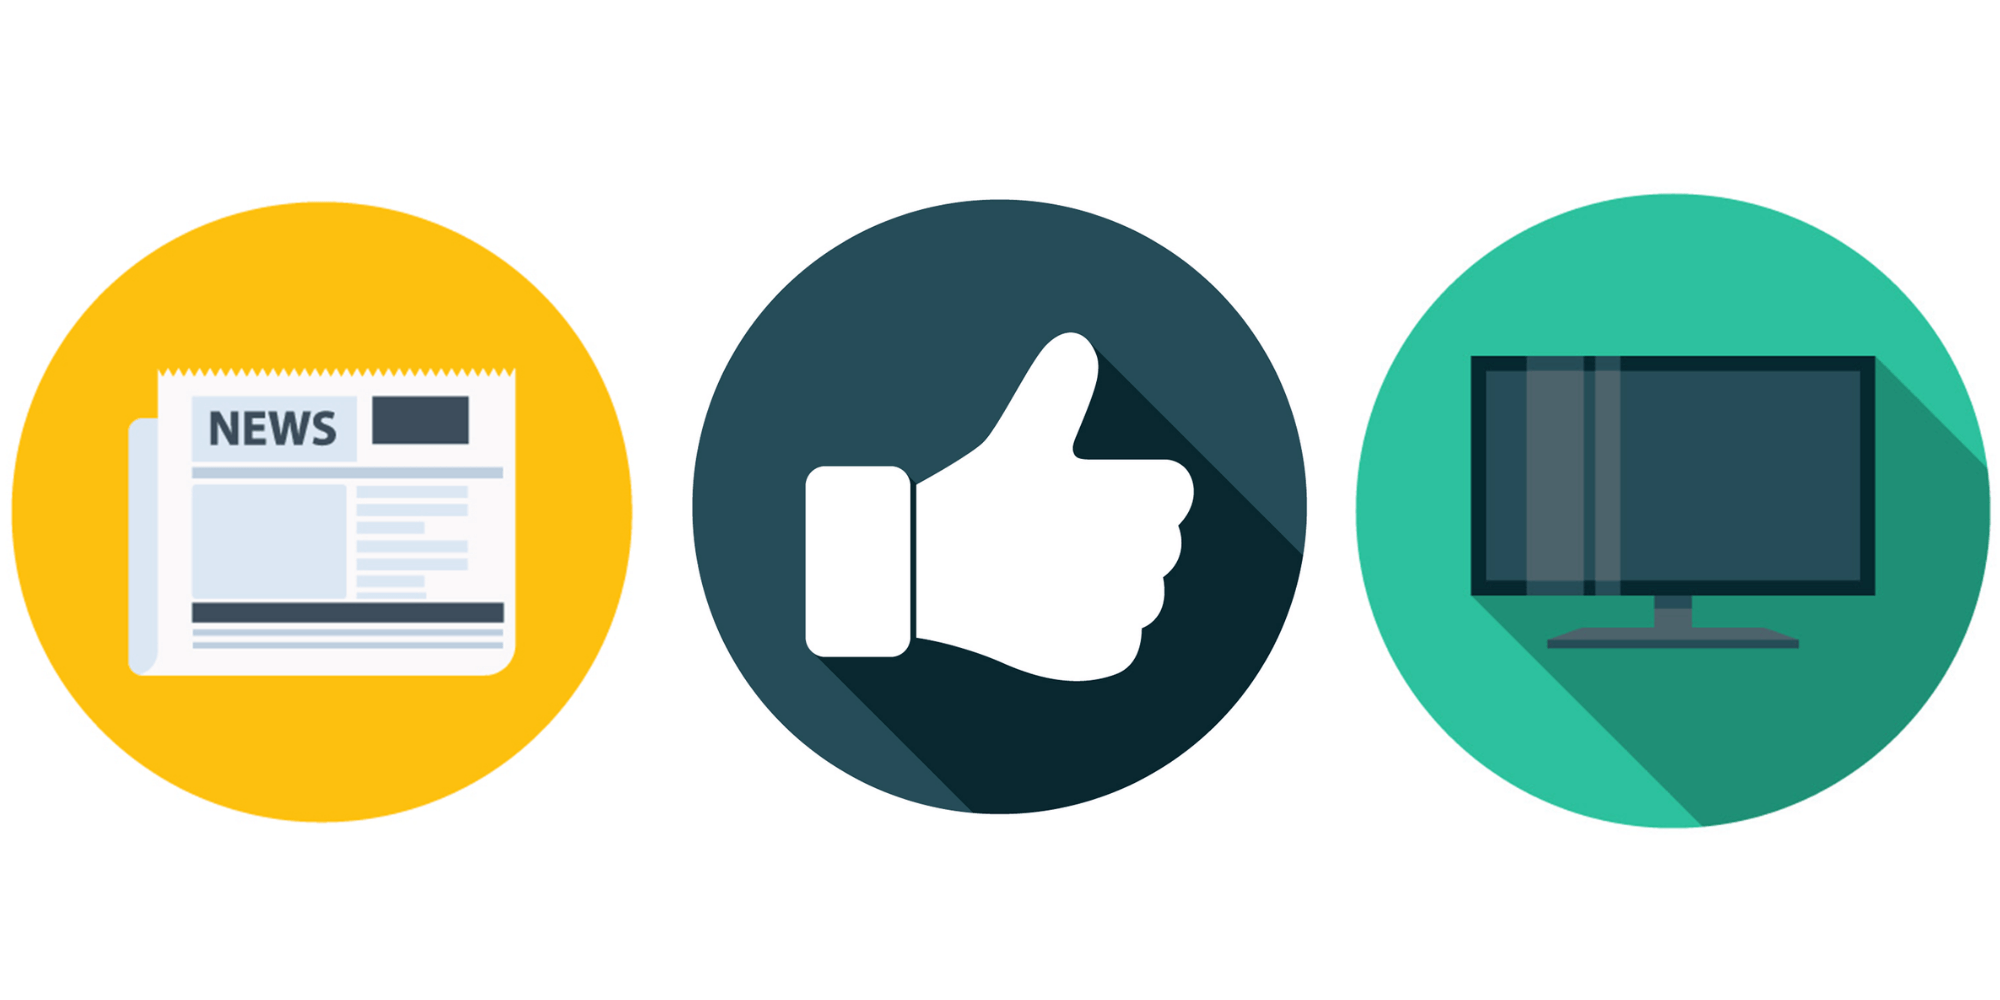 icons of newspaper, thumbs up and computer